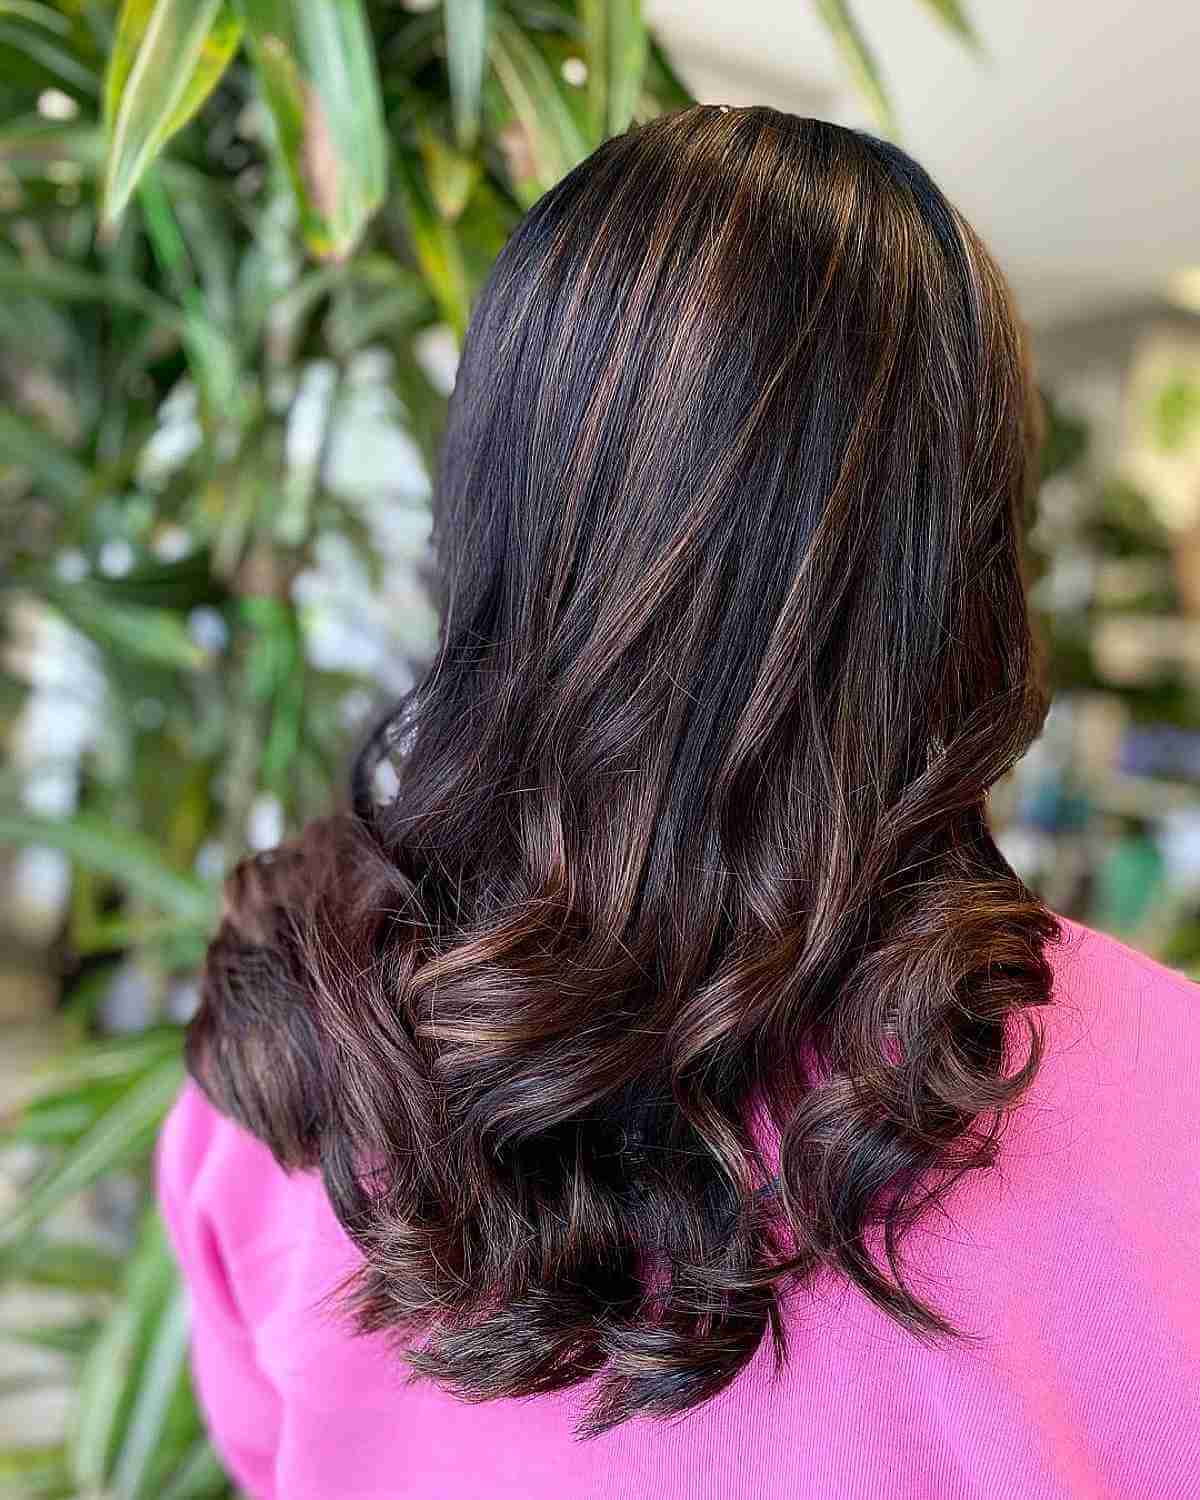 Brown-Black Balayage Highlights with Curled Ends